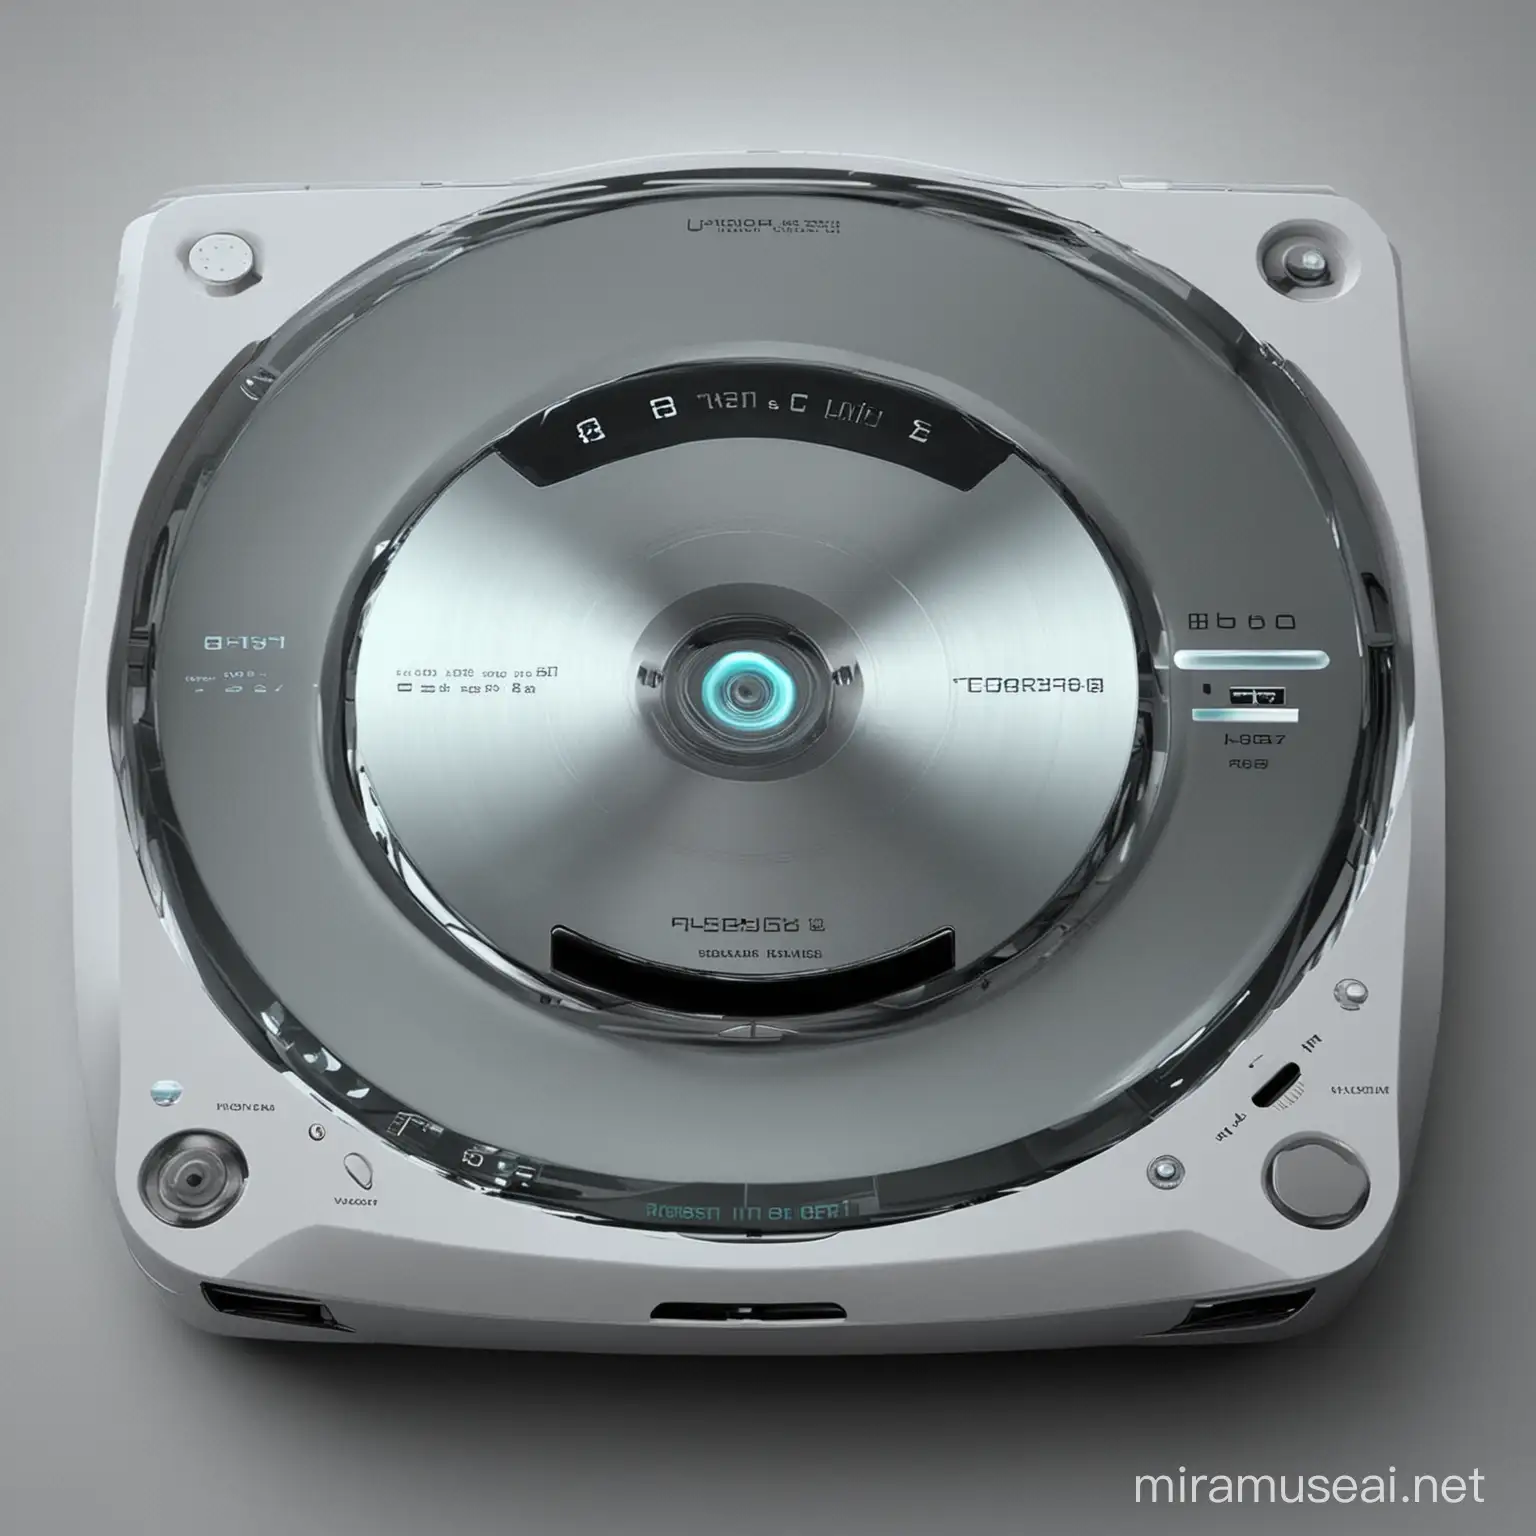 Futuristic Technological CD Player with Sleek Design